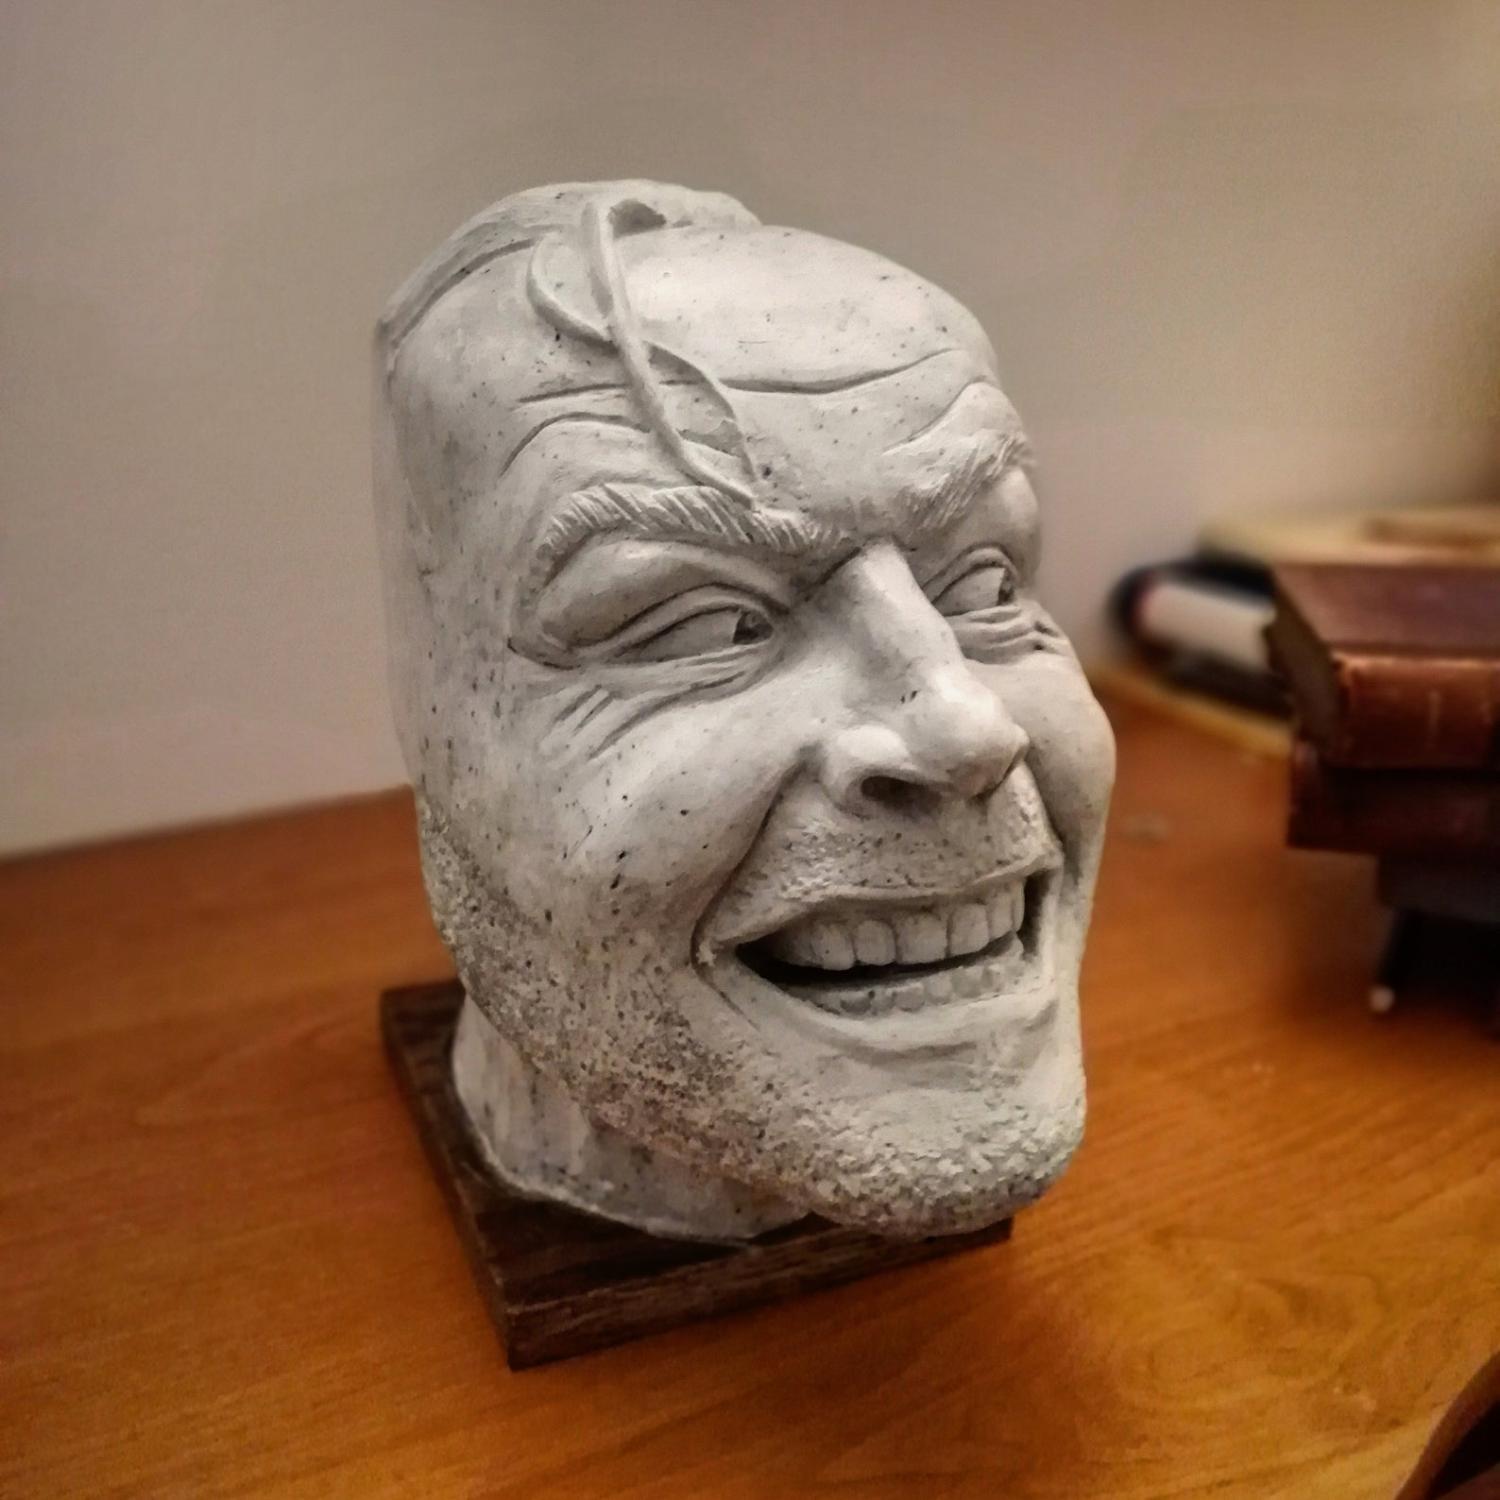 Side view of 'The Shining' Bookend on brown wooden surface